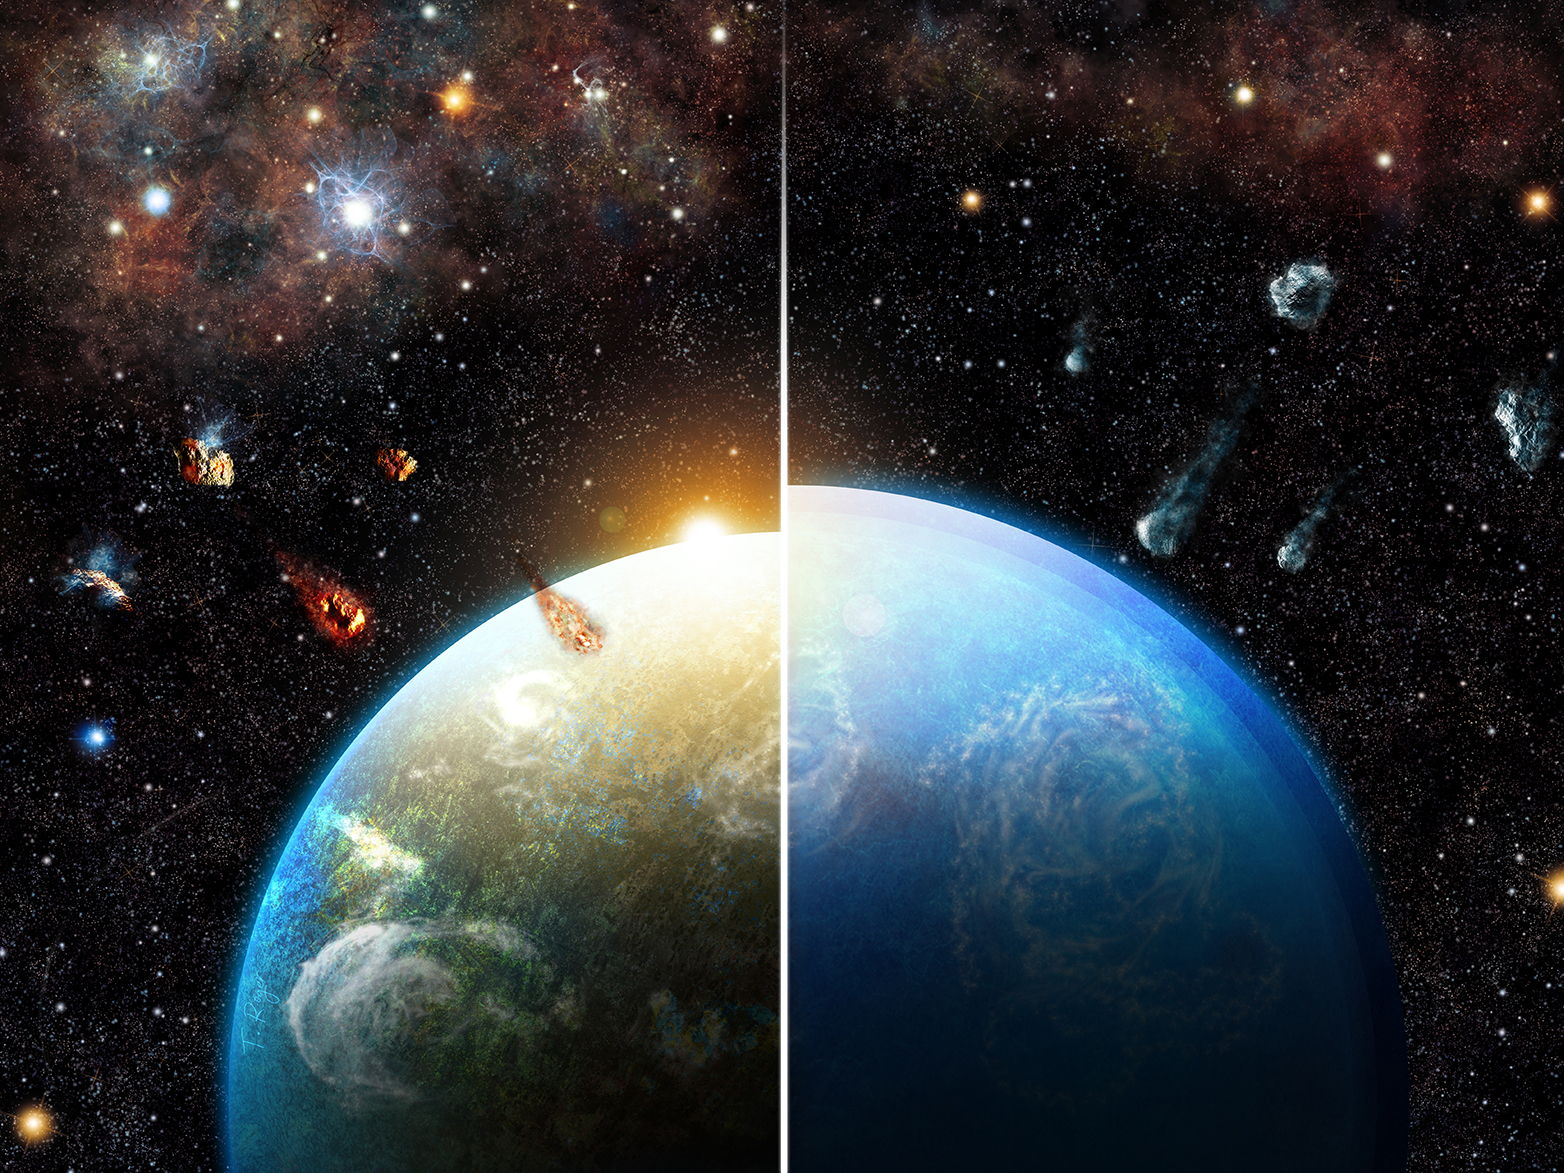 Enlarged view: Planetary systems born in dense and massive star-forming regions inherit substantial amounts of Aluminium-26, which dries out their building blocks before accretion (left). Planets formed in low-mass star-forming regions accrete many water-rich bodies and emerge as ocean worlds (right). ( Credit: Thibaut Roger)